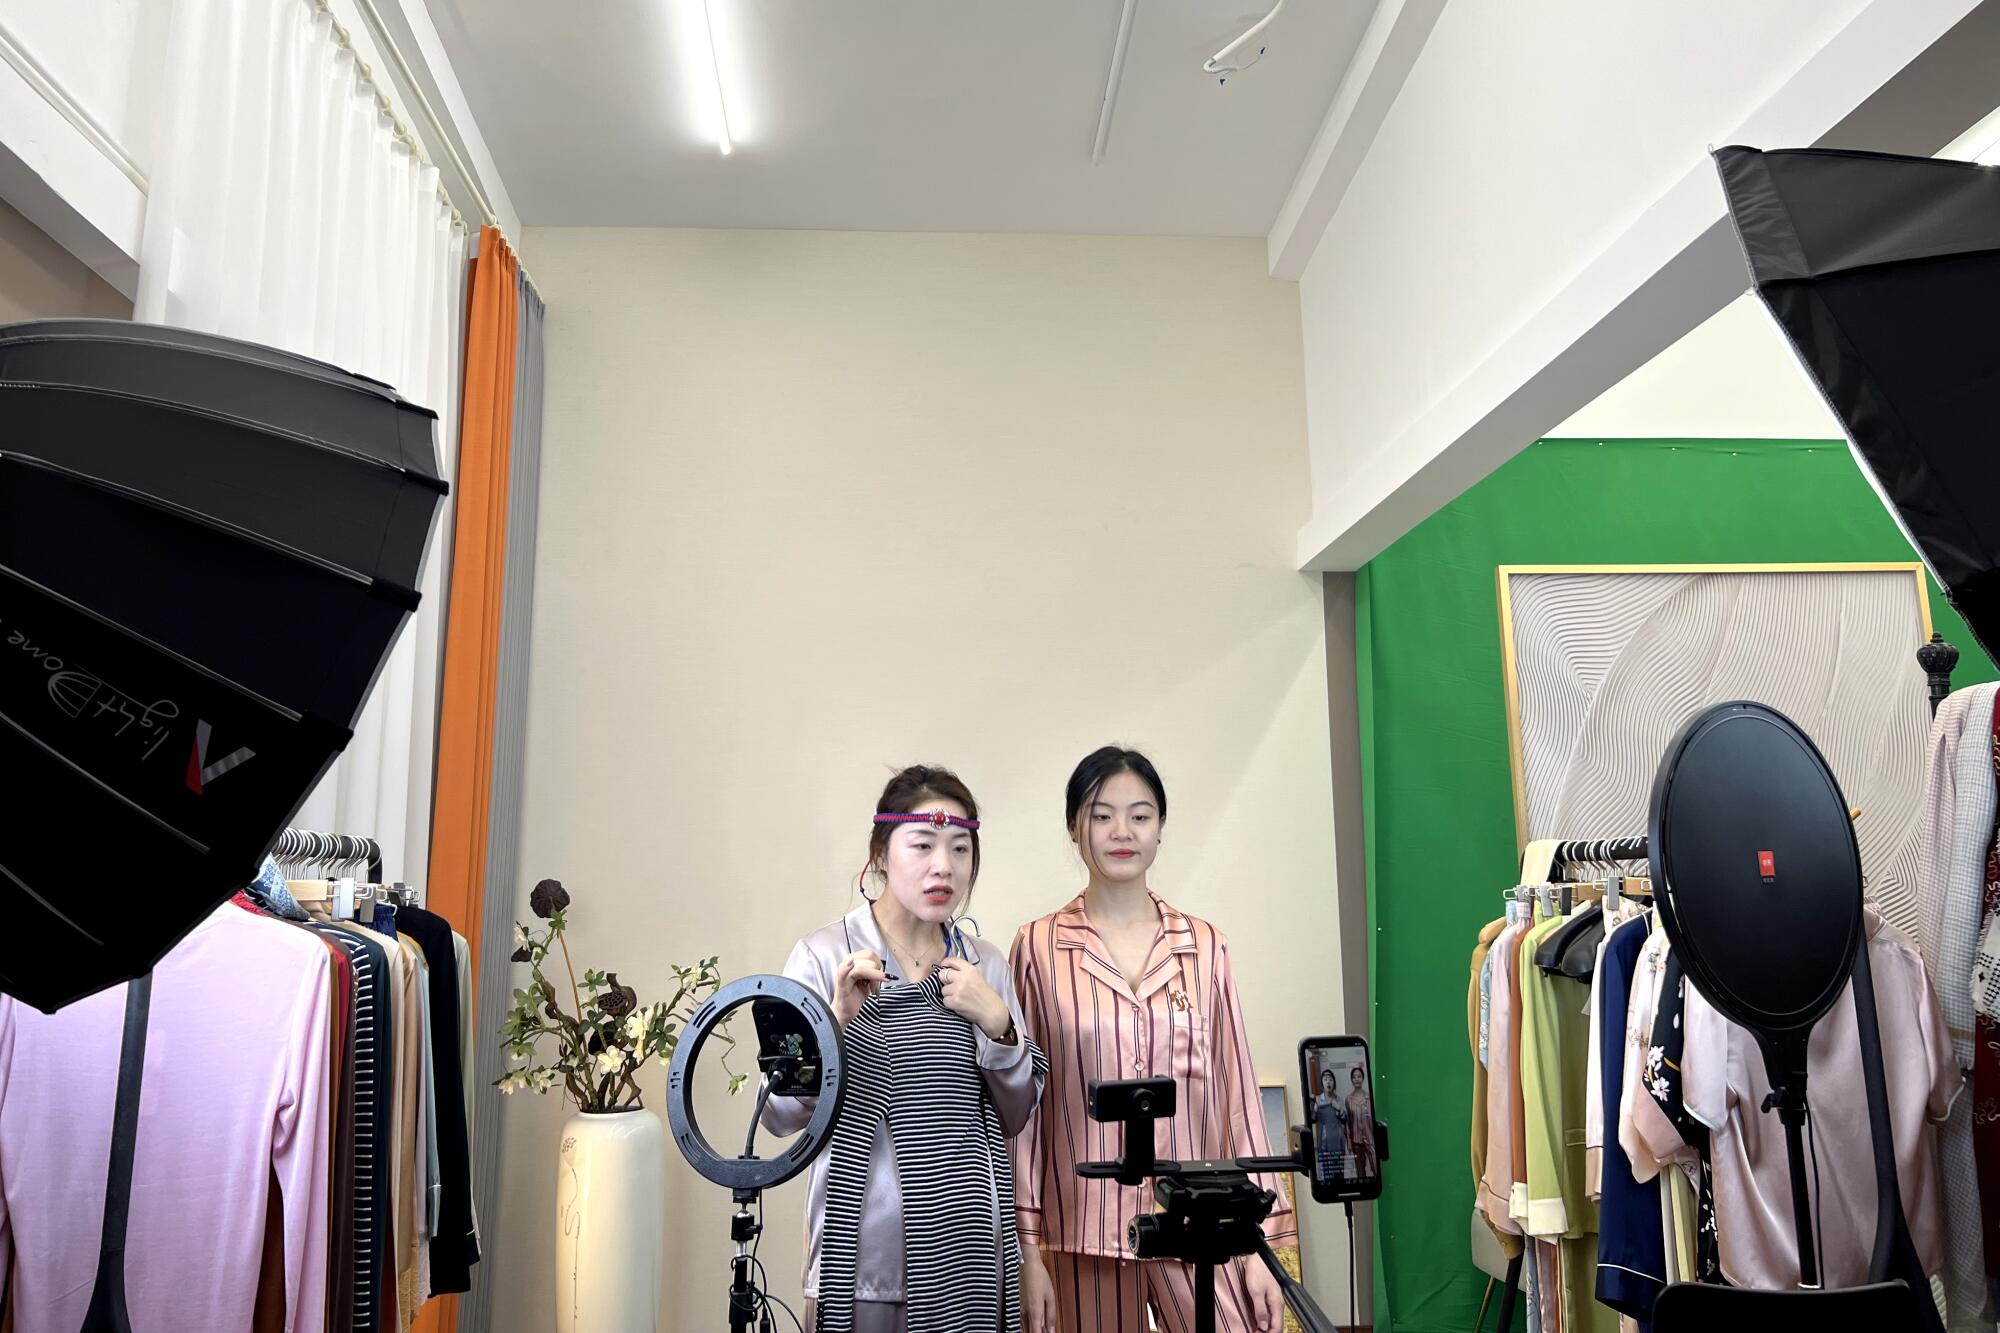 s competition rises from Chinese e-commerce apps like Shein